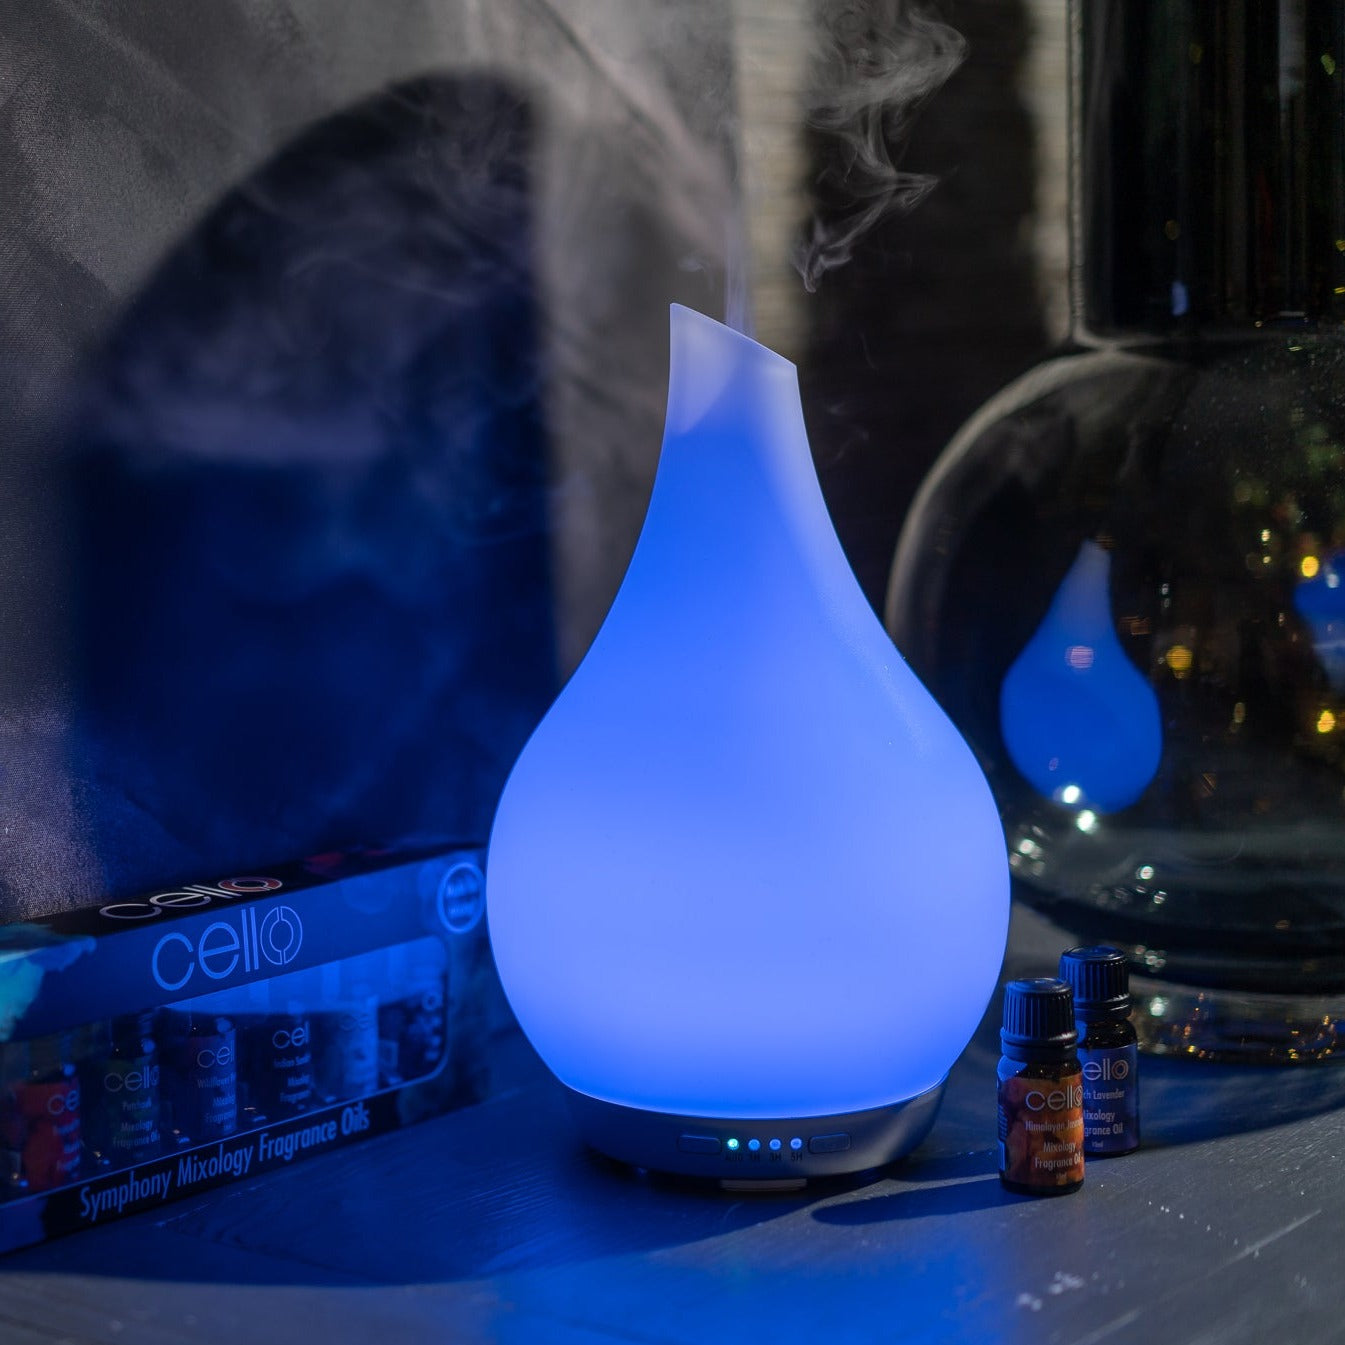 Cello - Large Ultrasonic Diffuser - Art Glass - Frosted